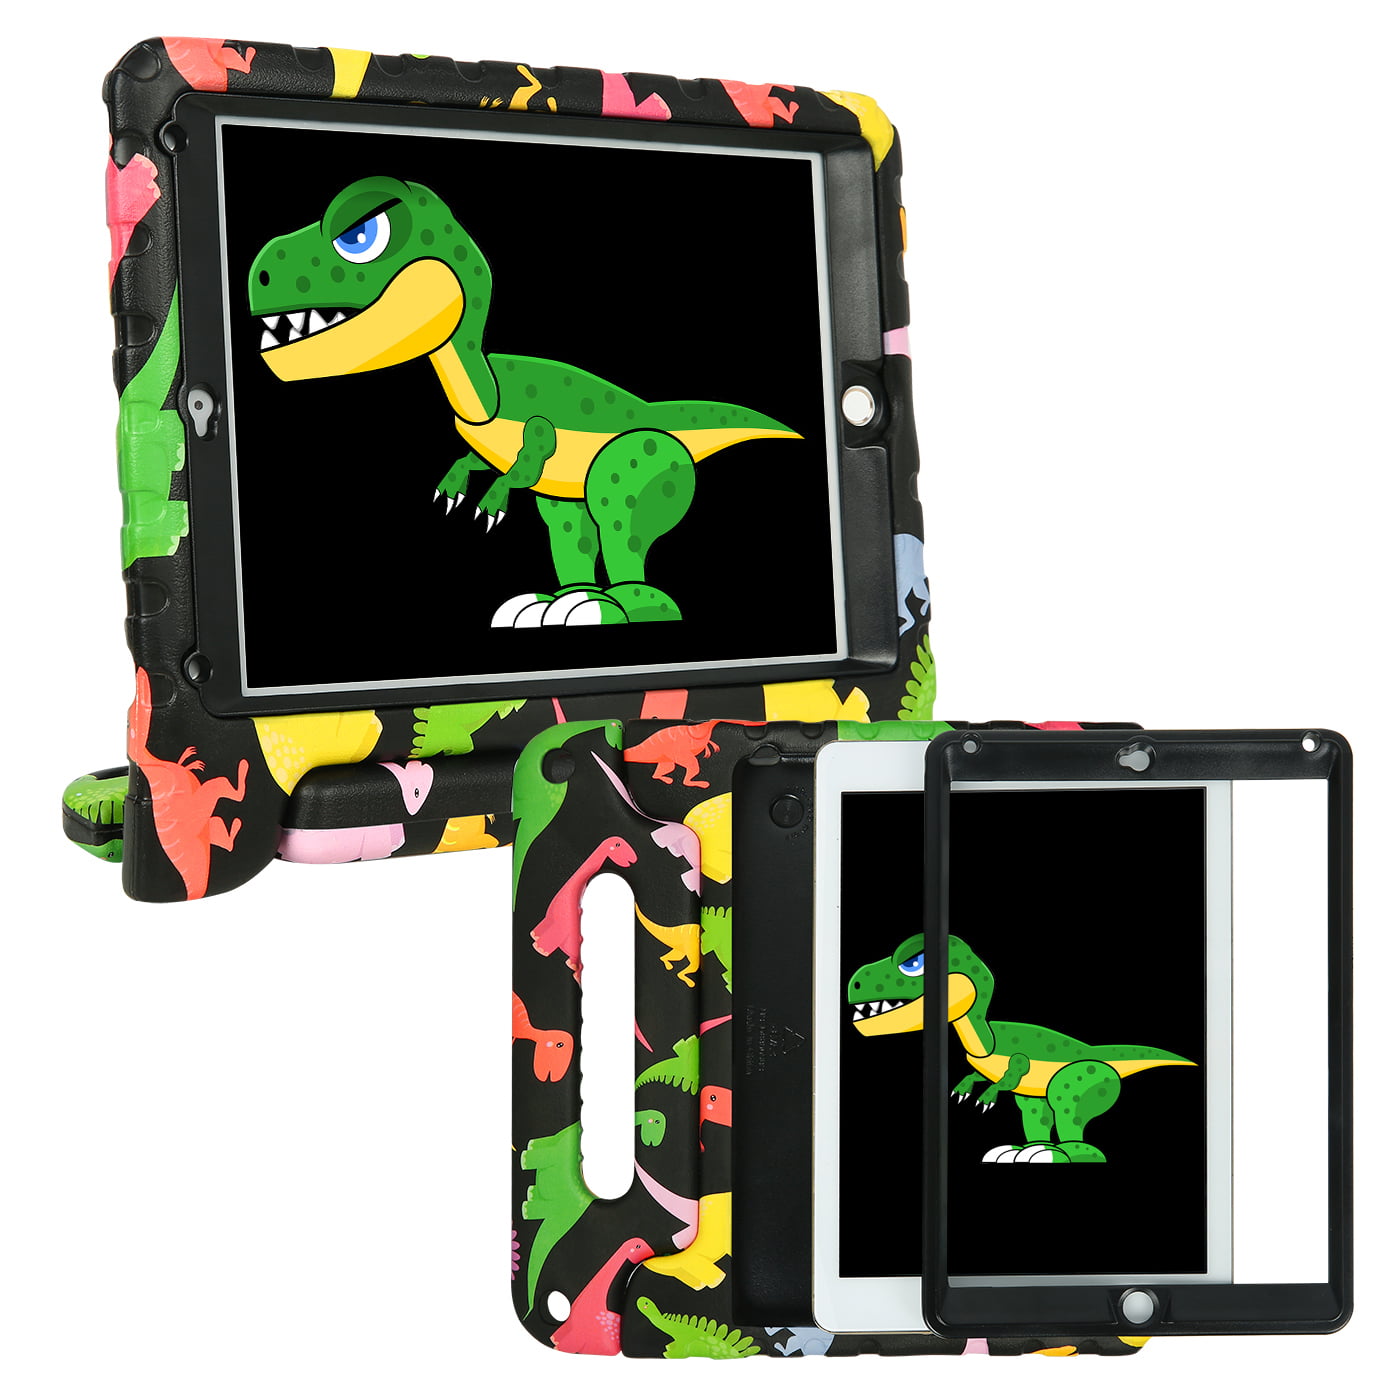 HDE Case for iPad Air Kids Protective Shock Proof Bumper Cover with Handle Stand for Apple iPad Air 1-2013 Release 1st Generation Green